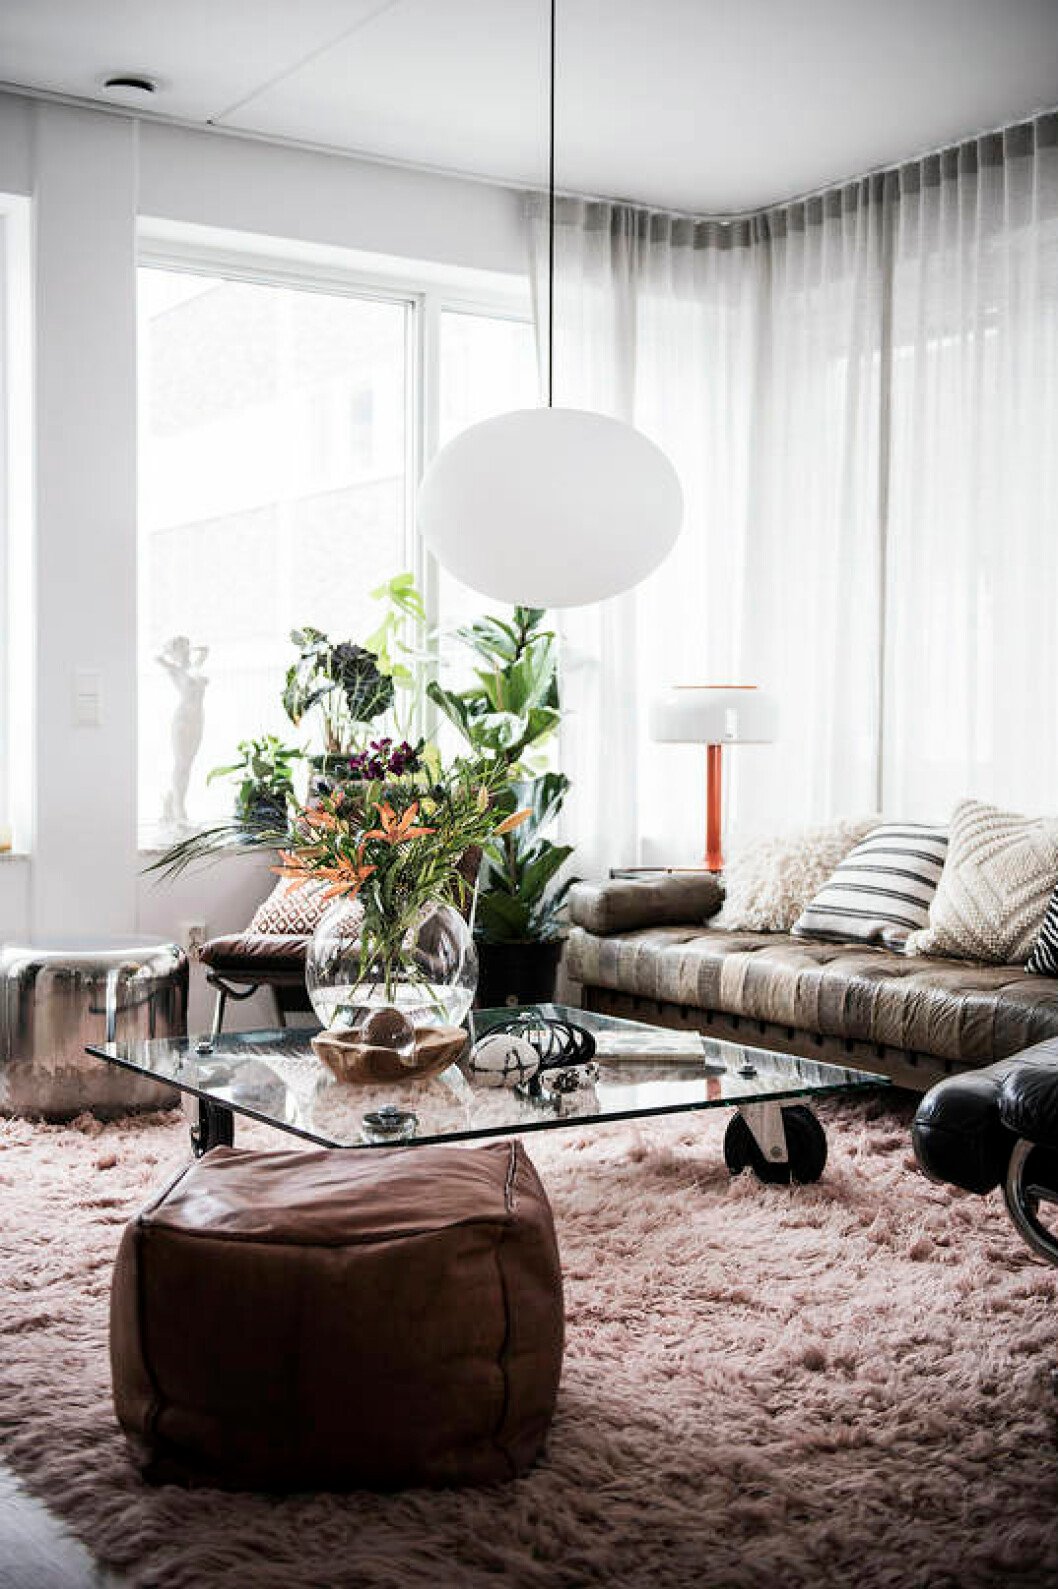 Big pink rug and white flowing curtains i livingroom. A mix of vintage and new decor. Scandinavian decoration and ideas.